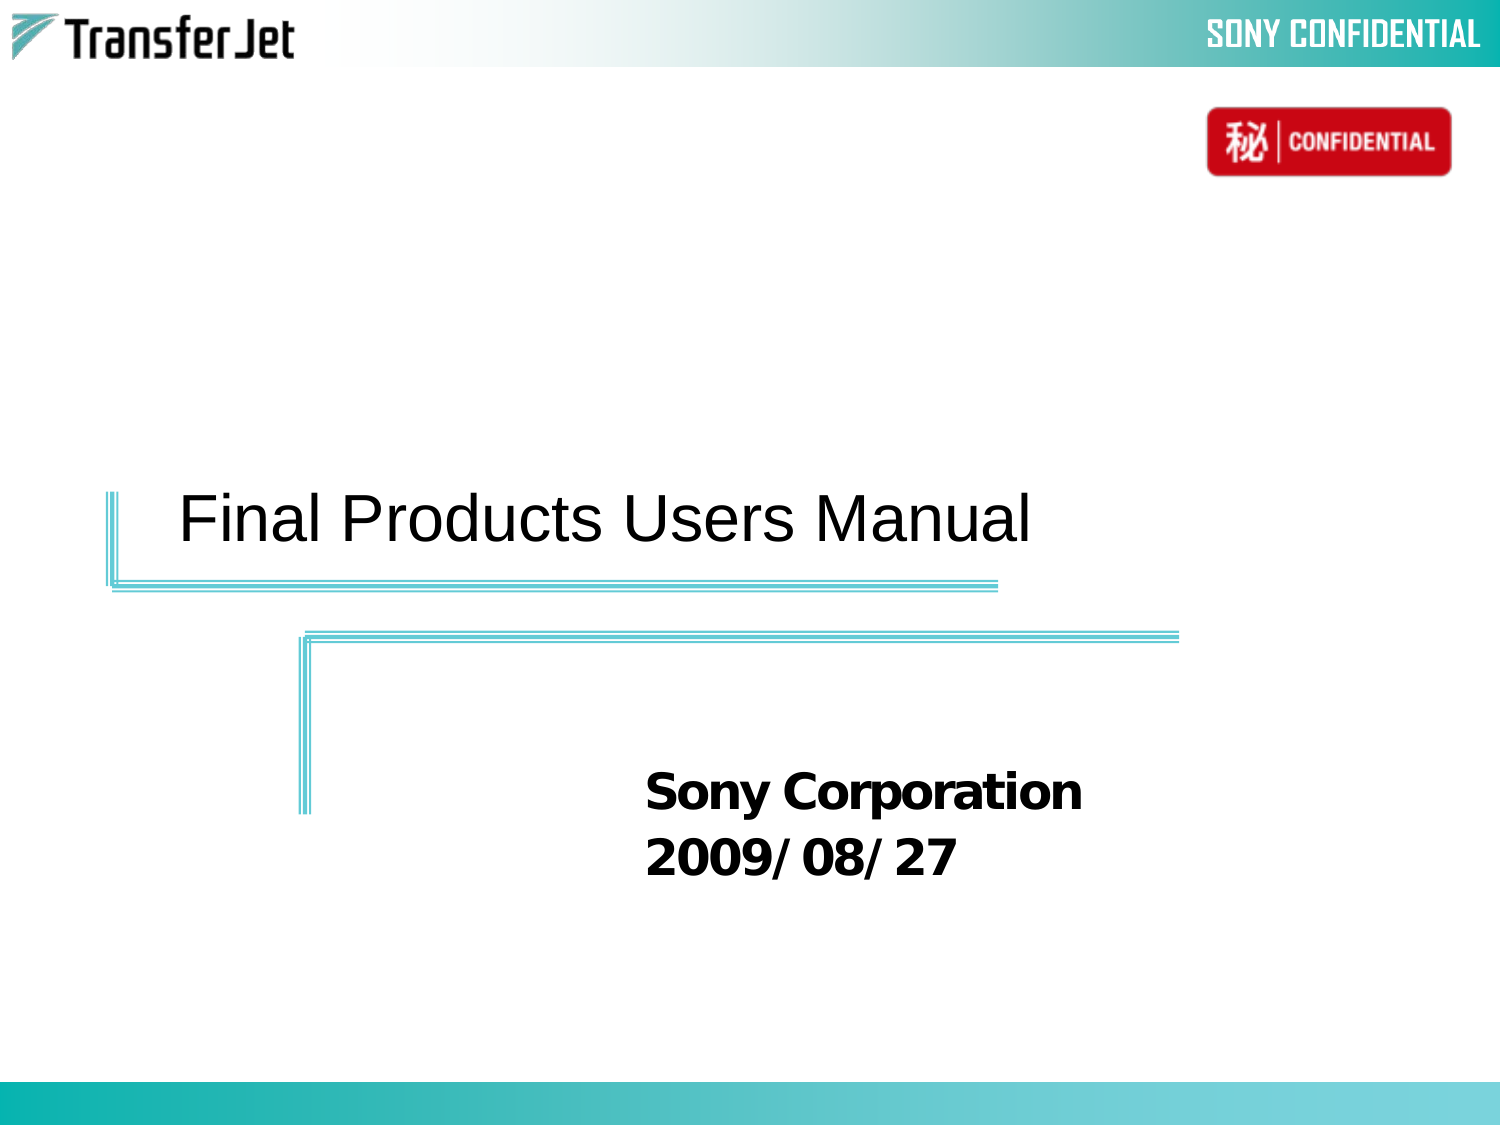 Sony Corporation 2009/08/27Final Products Users Manual